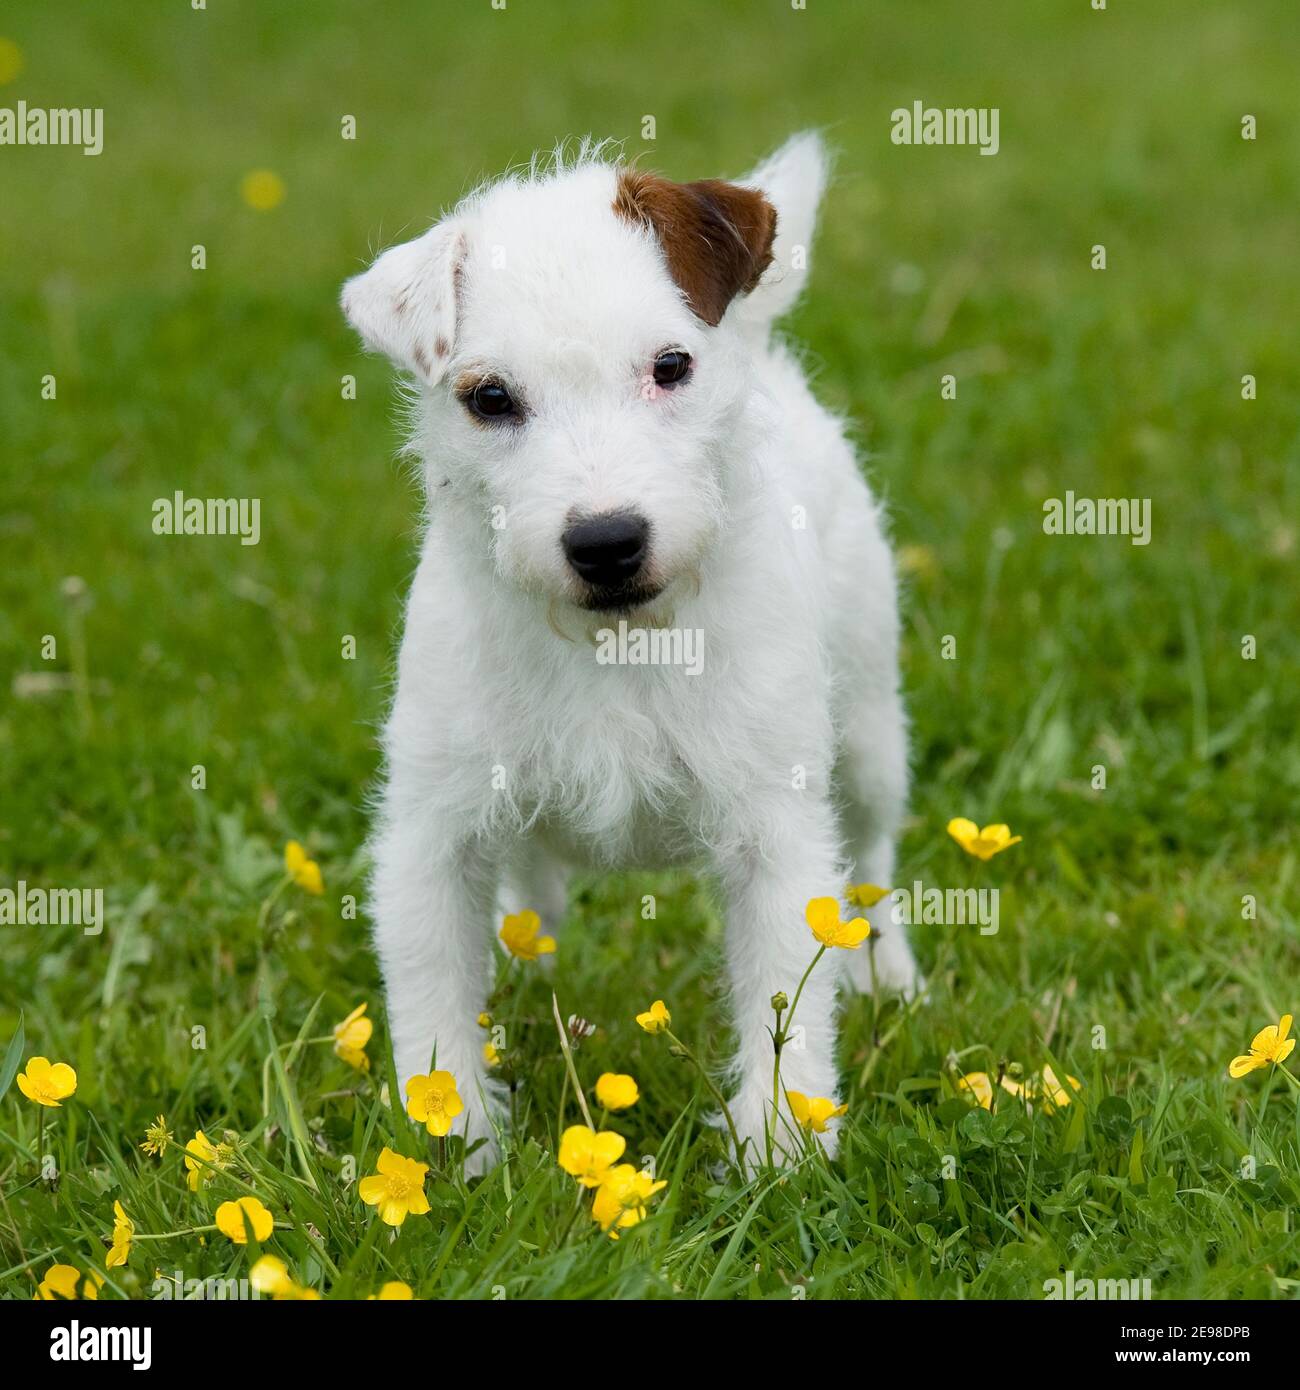 Jack Russell terrier dog puppy Stock Photo